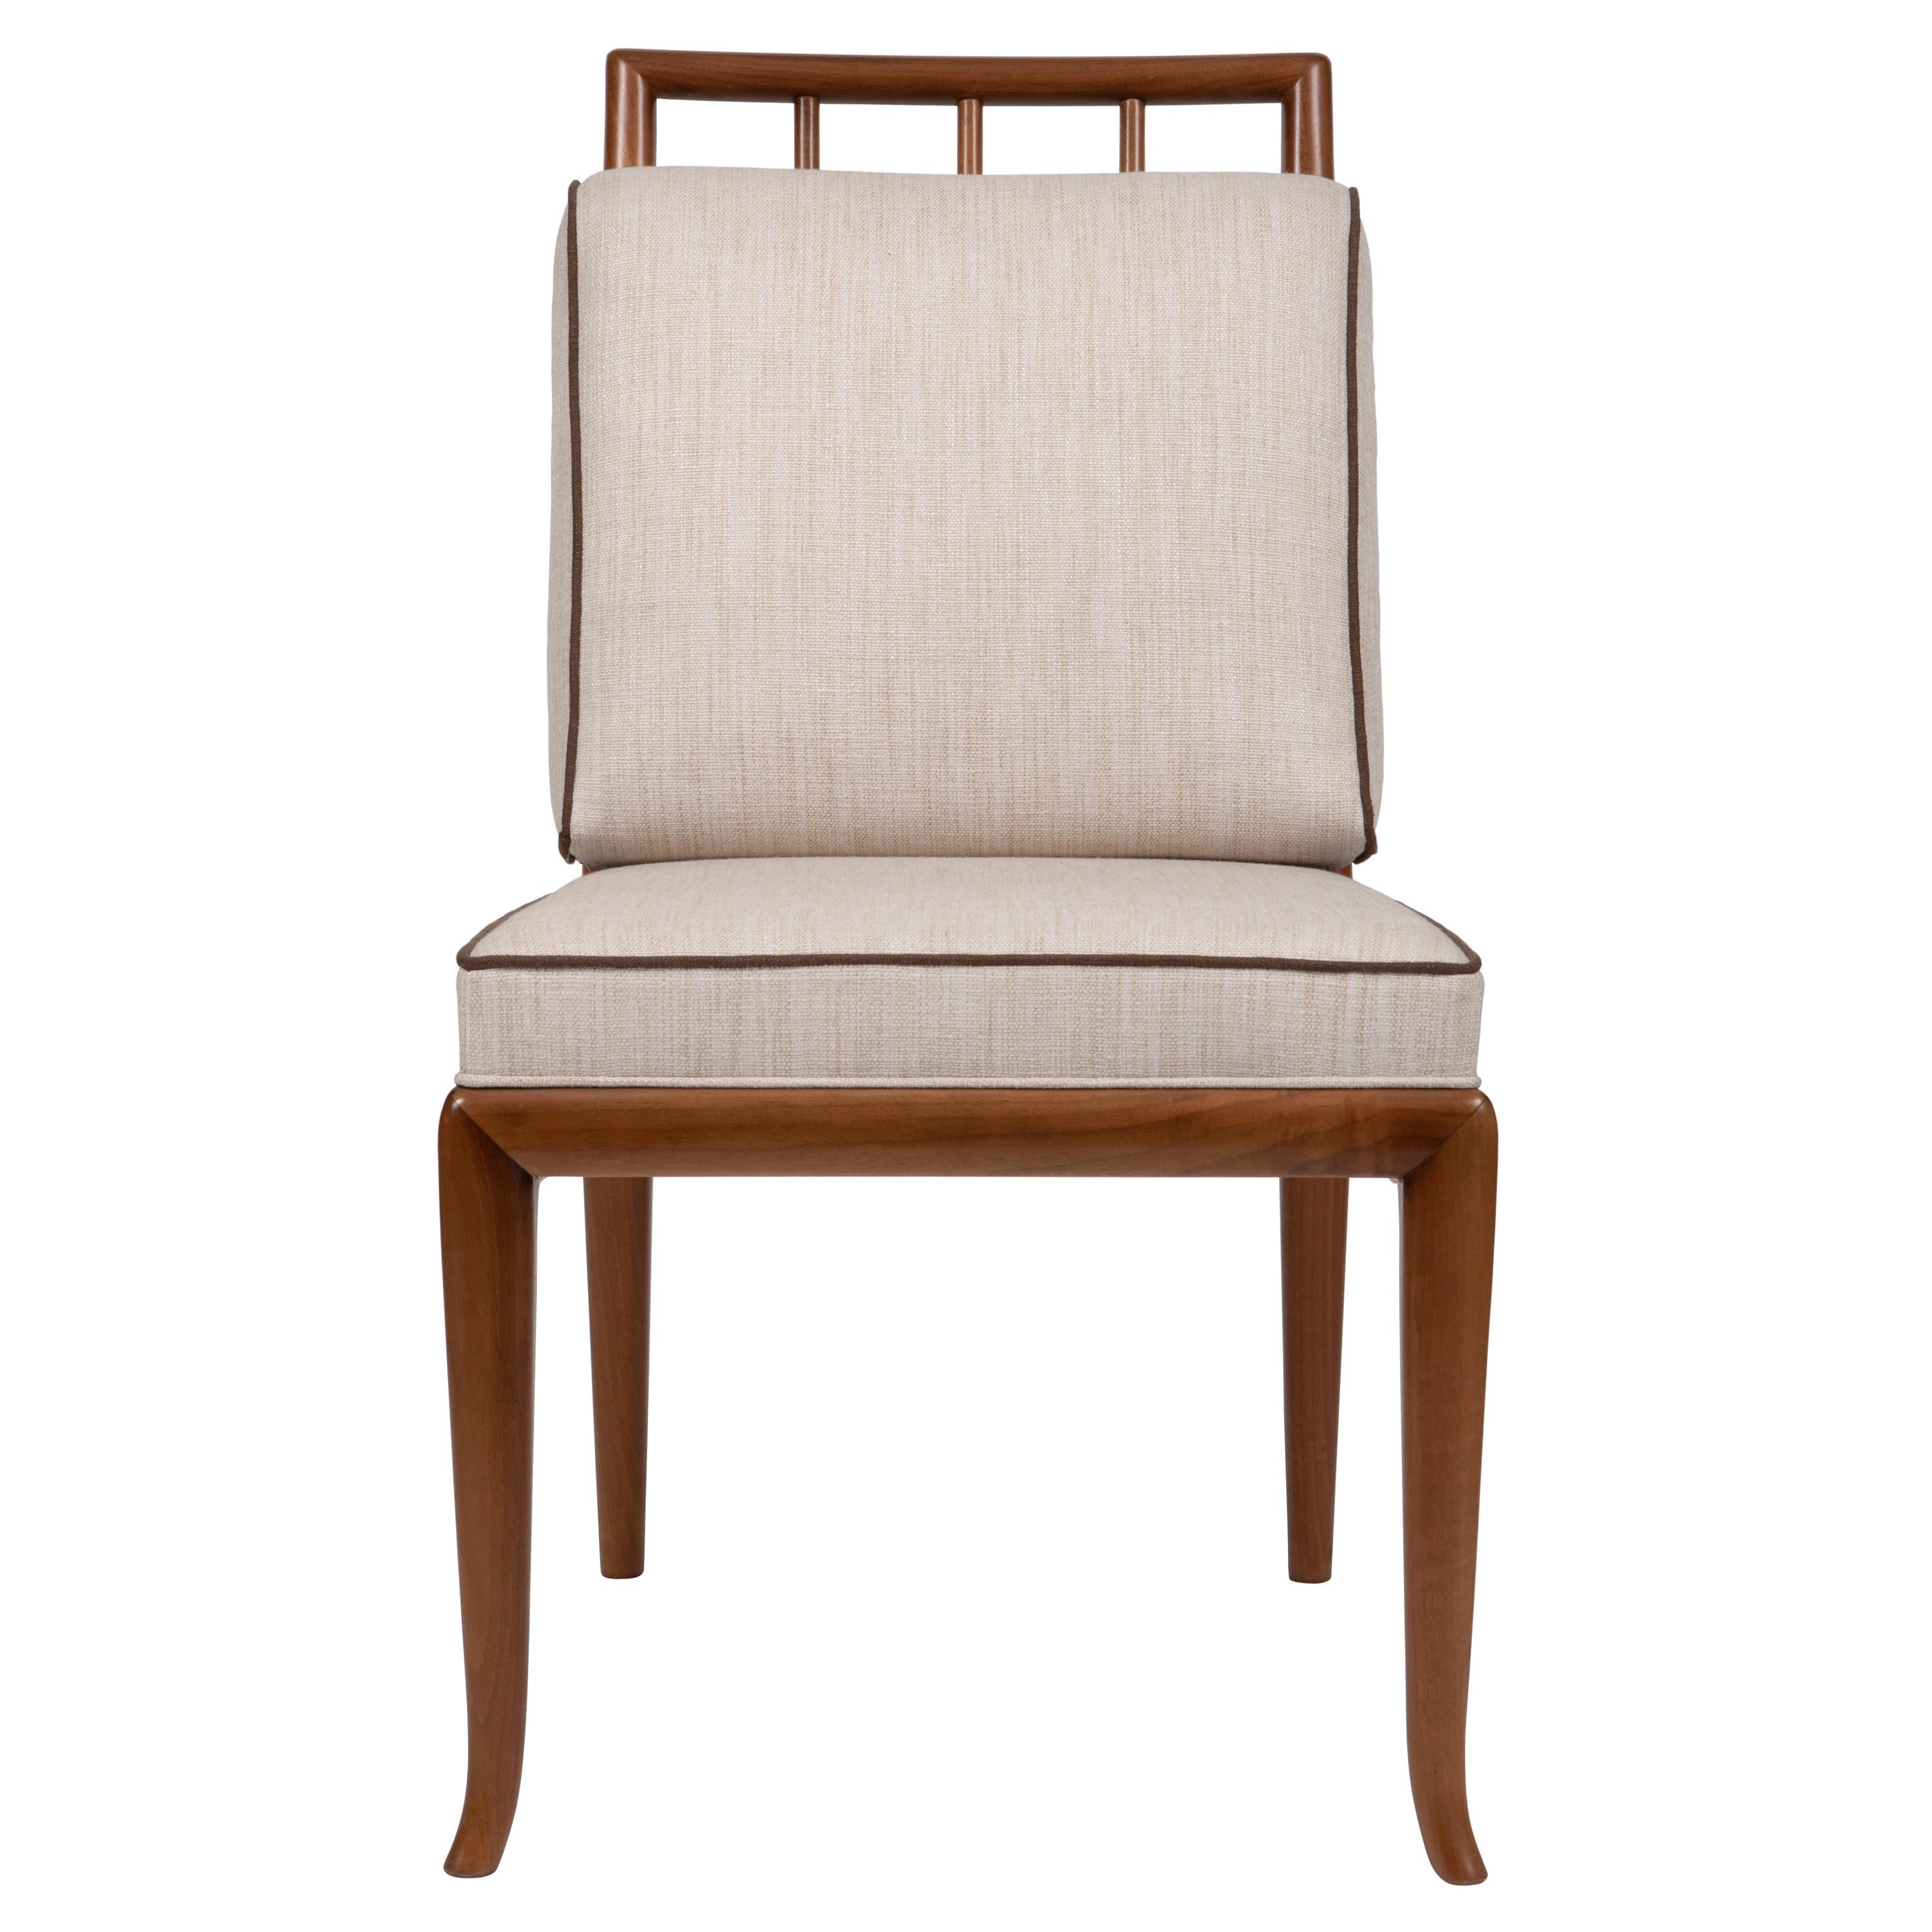 Contemporary Style Walnut Frame Dining Chair, Made in Italy